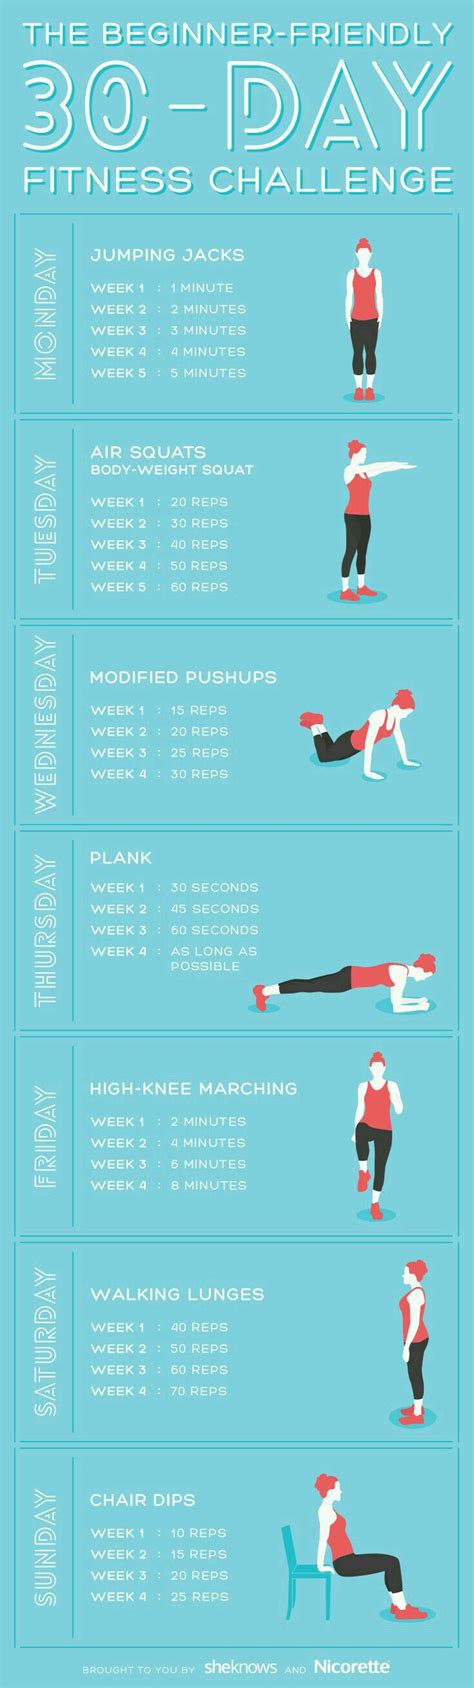 Pin By Summer Cole On Fitness Challenges Workout Challenge Easy Yoga